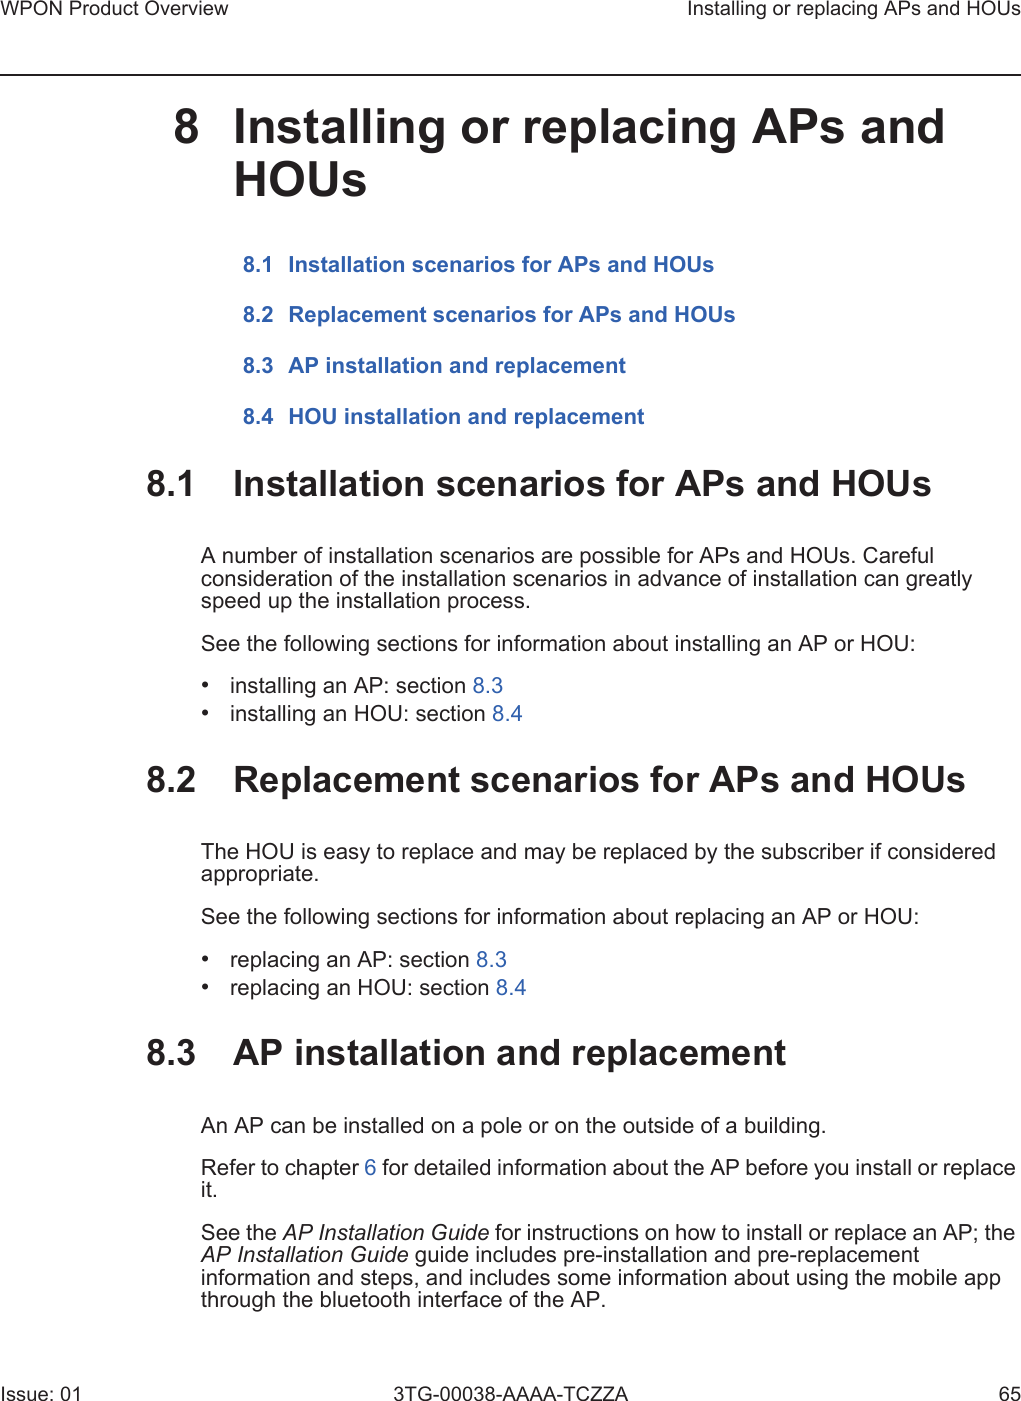 WPON Product Overview Installing or replacing APs and HOUsIssue: 01 3TG-00038-AAAA-TCZZA 658 Installing or replacing APs and HOUs8.1 Installation scenarios for APs and HOUs8.2 Replacement scenarios for APs and HOUs8.3 AP installation and replacement8.4 HOU installation and replacement8.1 Installation scenarios for APs and HOUsA number of installation scenarios are possible for APs and HOUs. Careful consideration of the installation scenarios in advance of installation can greatly speed up the installation process. See the following sections for information about installing an AP or HOU:•installing an AP: section 8.3•installing an HOU: section 8.48.2 Replacement scenarios for APs and HOUsThe HOU is easy to replace and may be replaced by the subscriber if considered appropriate. See the following sections for information about replacing an AP or HOU:•replacing an AP: section 8.3•replacing an HOU: section 8.48.3 AP installation and replacementAn AP can be installed on a pole or on the outside of a building. Refer to chapter 6 for detailed information about the AP before you install or replace it.See the AP Installation Guide for instructions on how to install or replace an AP; the AP Installation Guide guide includes pre-installation and pre-replacement information and steps, and includes some information about using the mobile app through the bluetooth interface of the AP.